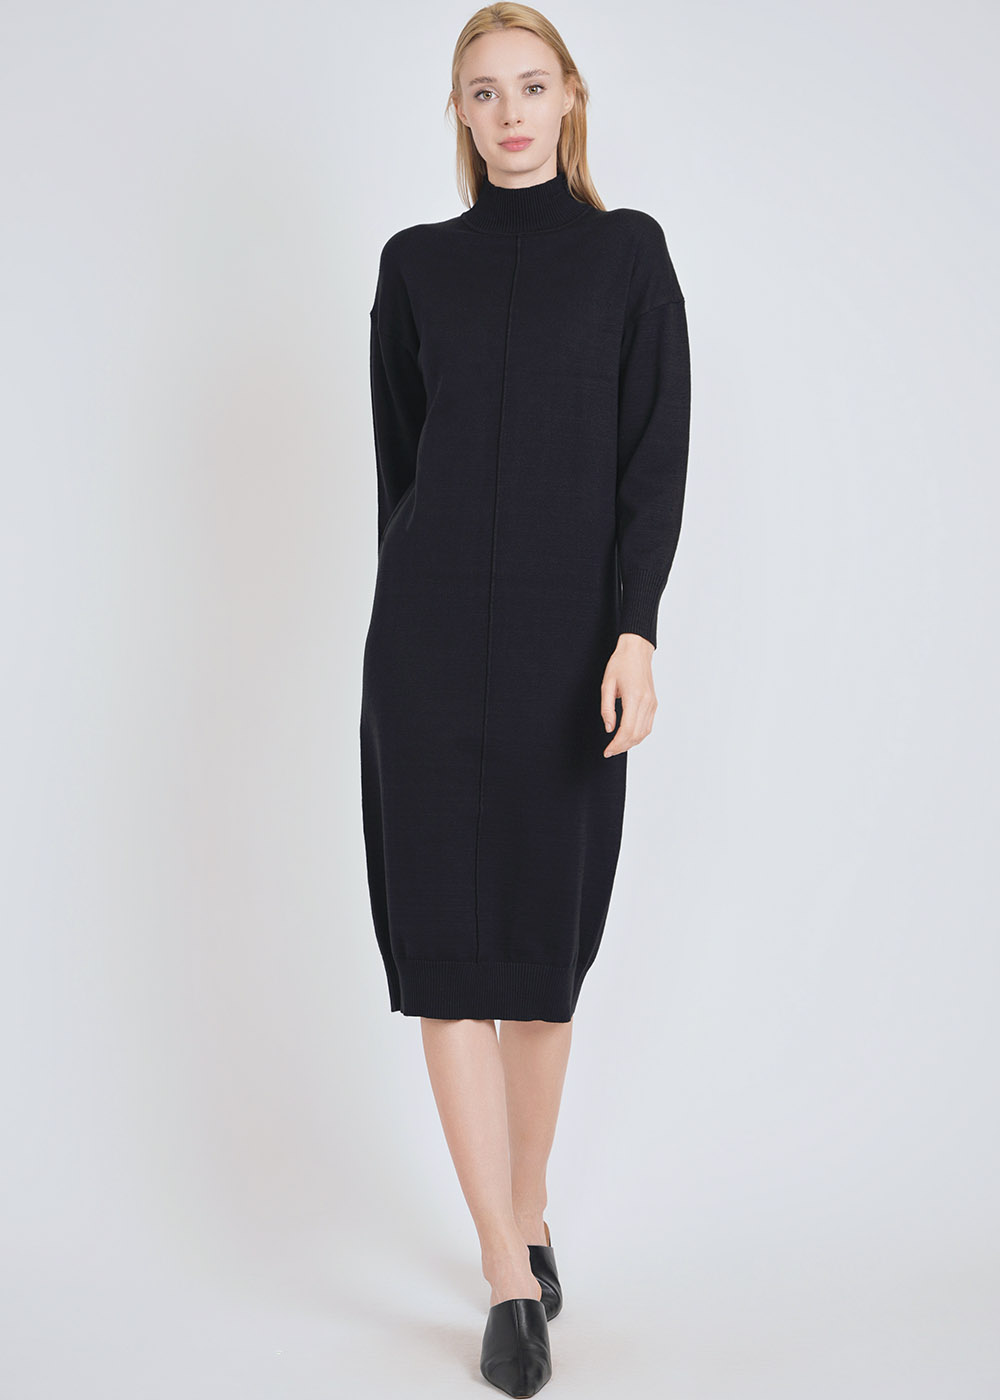 Black Beauty: Dress with Ribbed Features & Elevated Neck